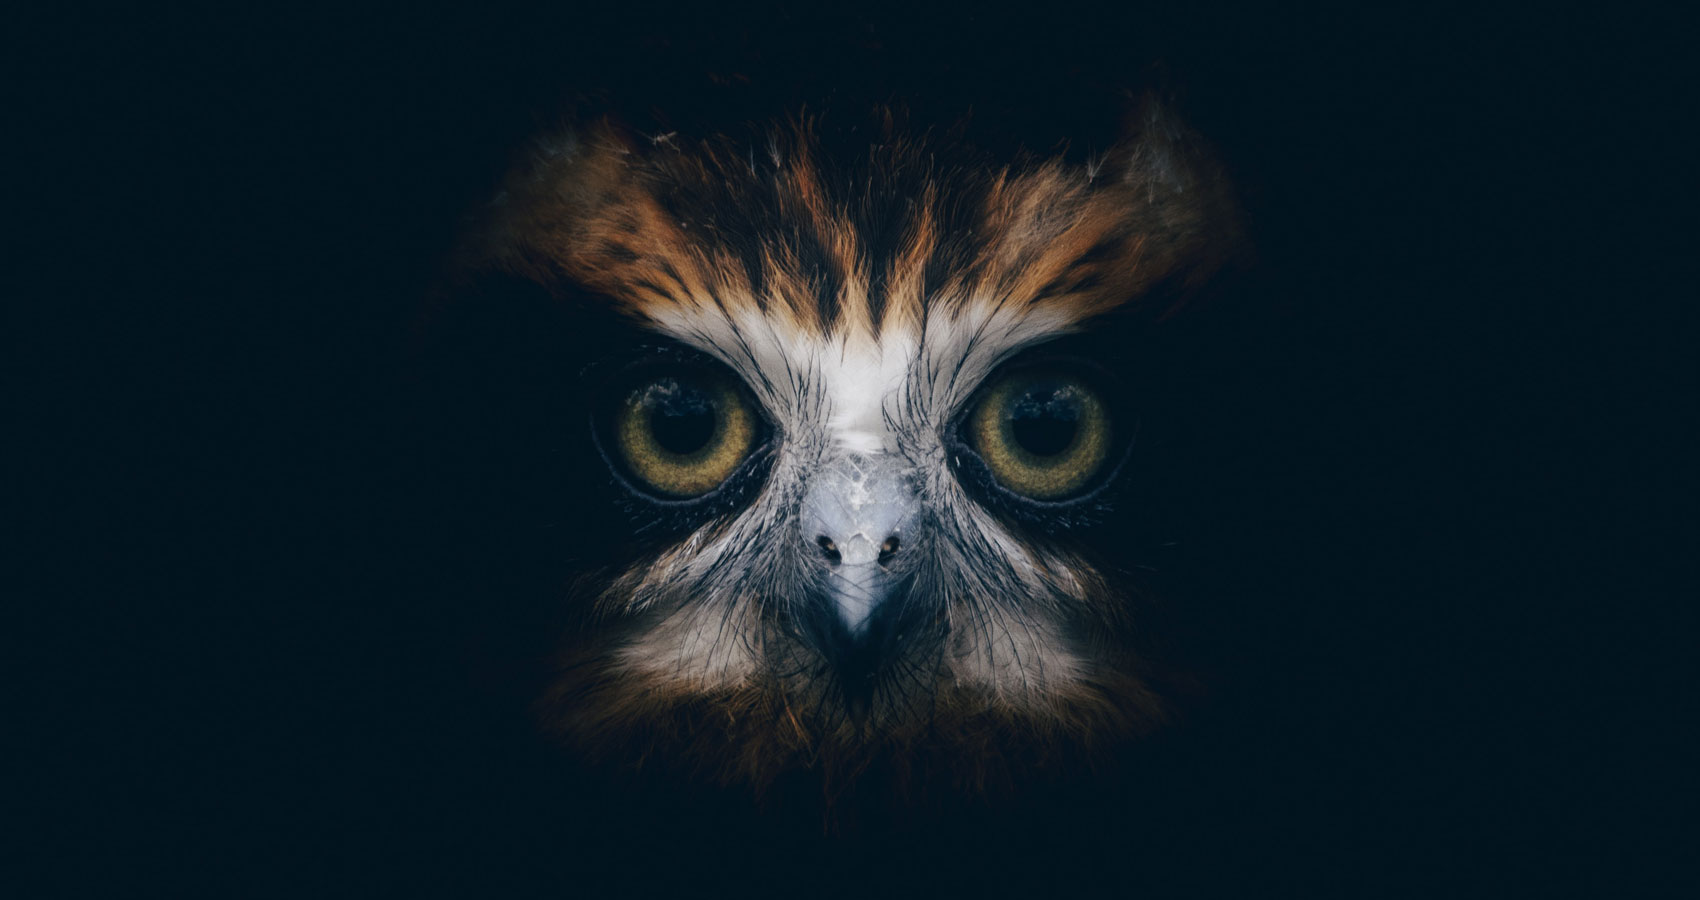 The Owl Watches Over Them, a poem by Wendy Markel at Spillwords.com